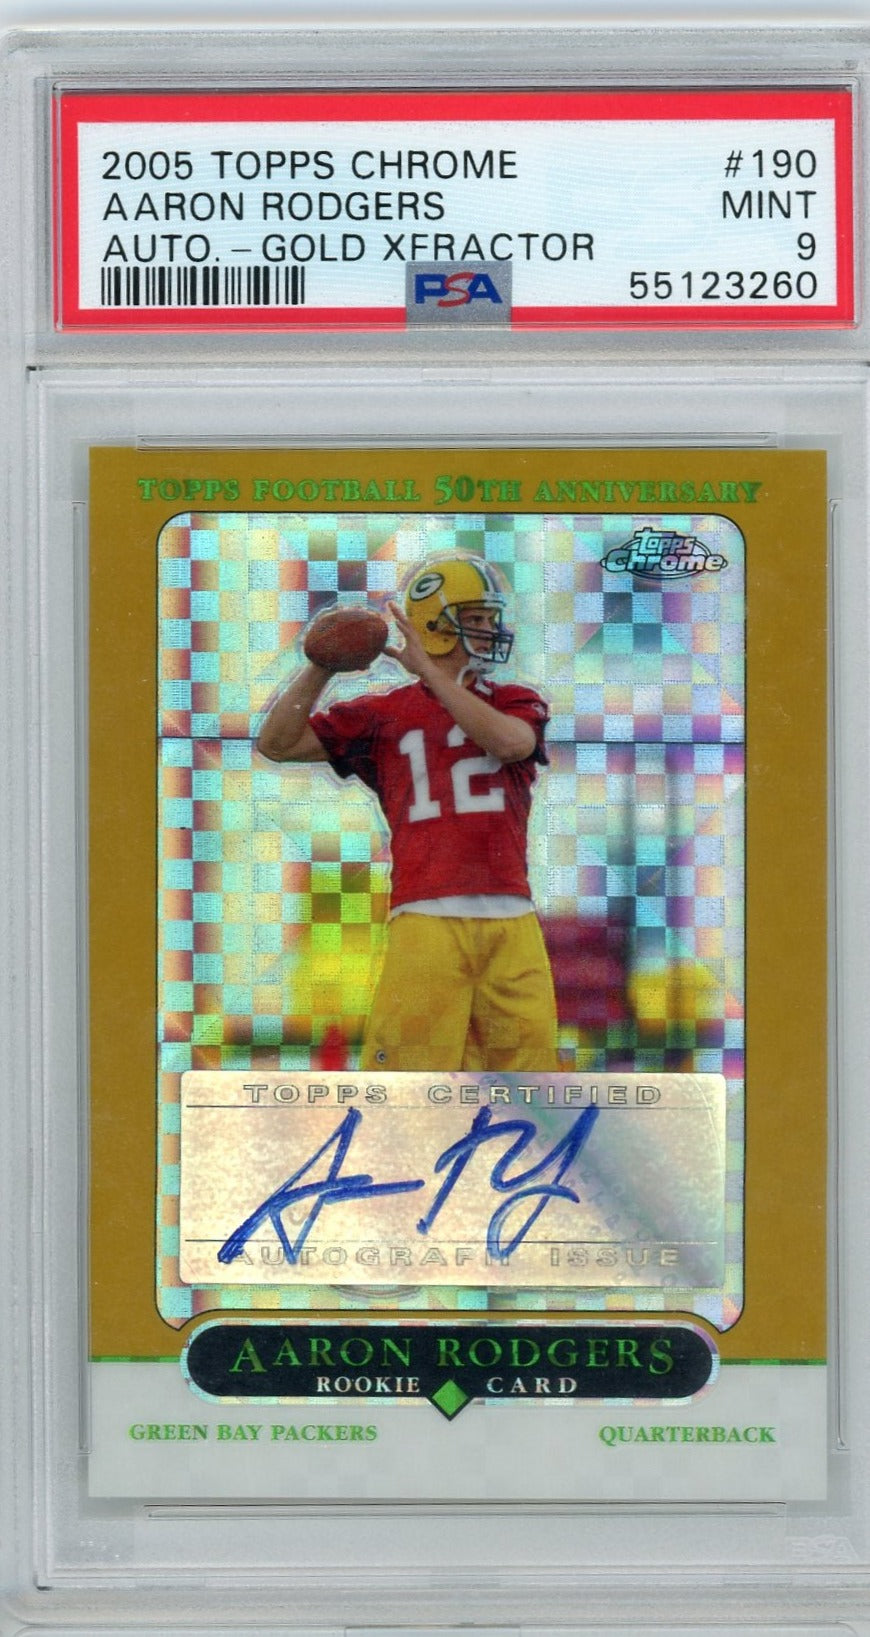 AARON RODGERS - 2005 Football Topps Chrome Gold X-Fractor Rookie Auto 388/399